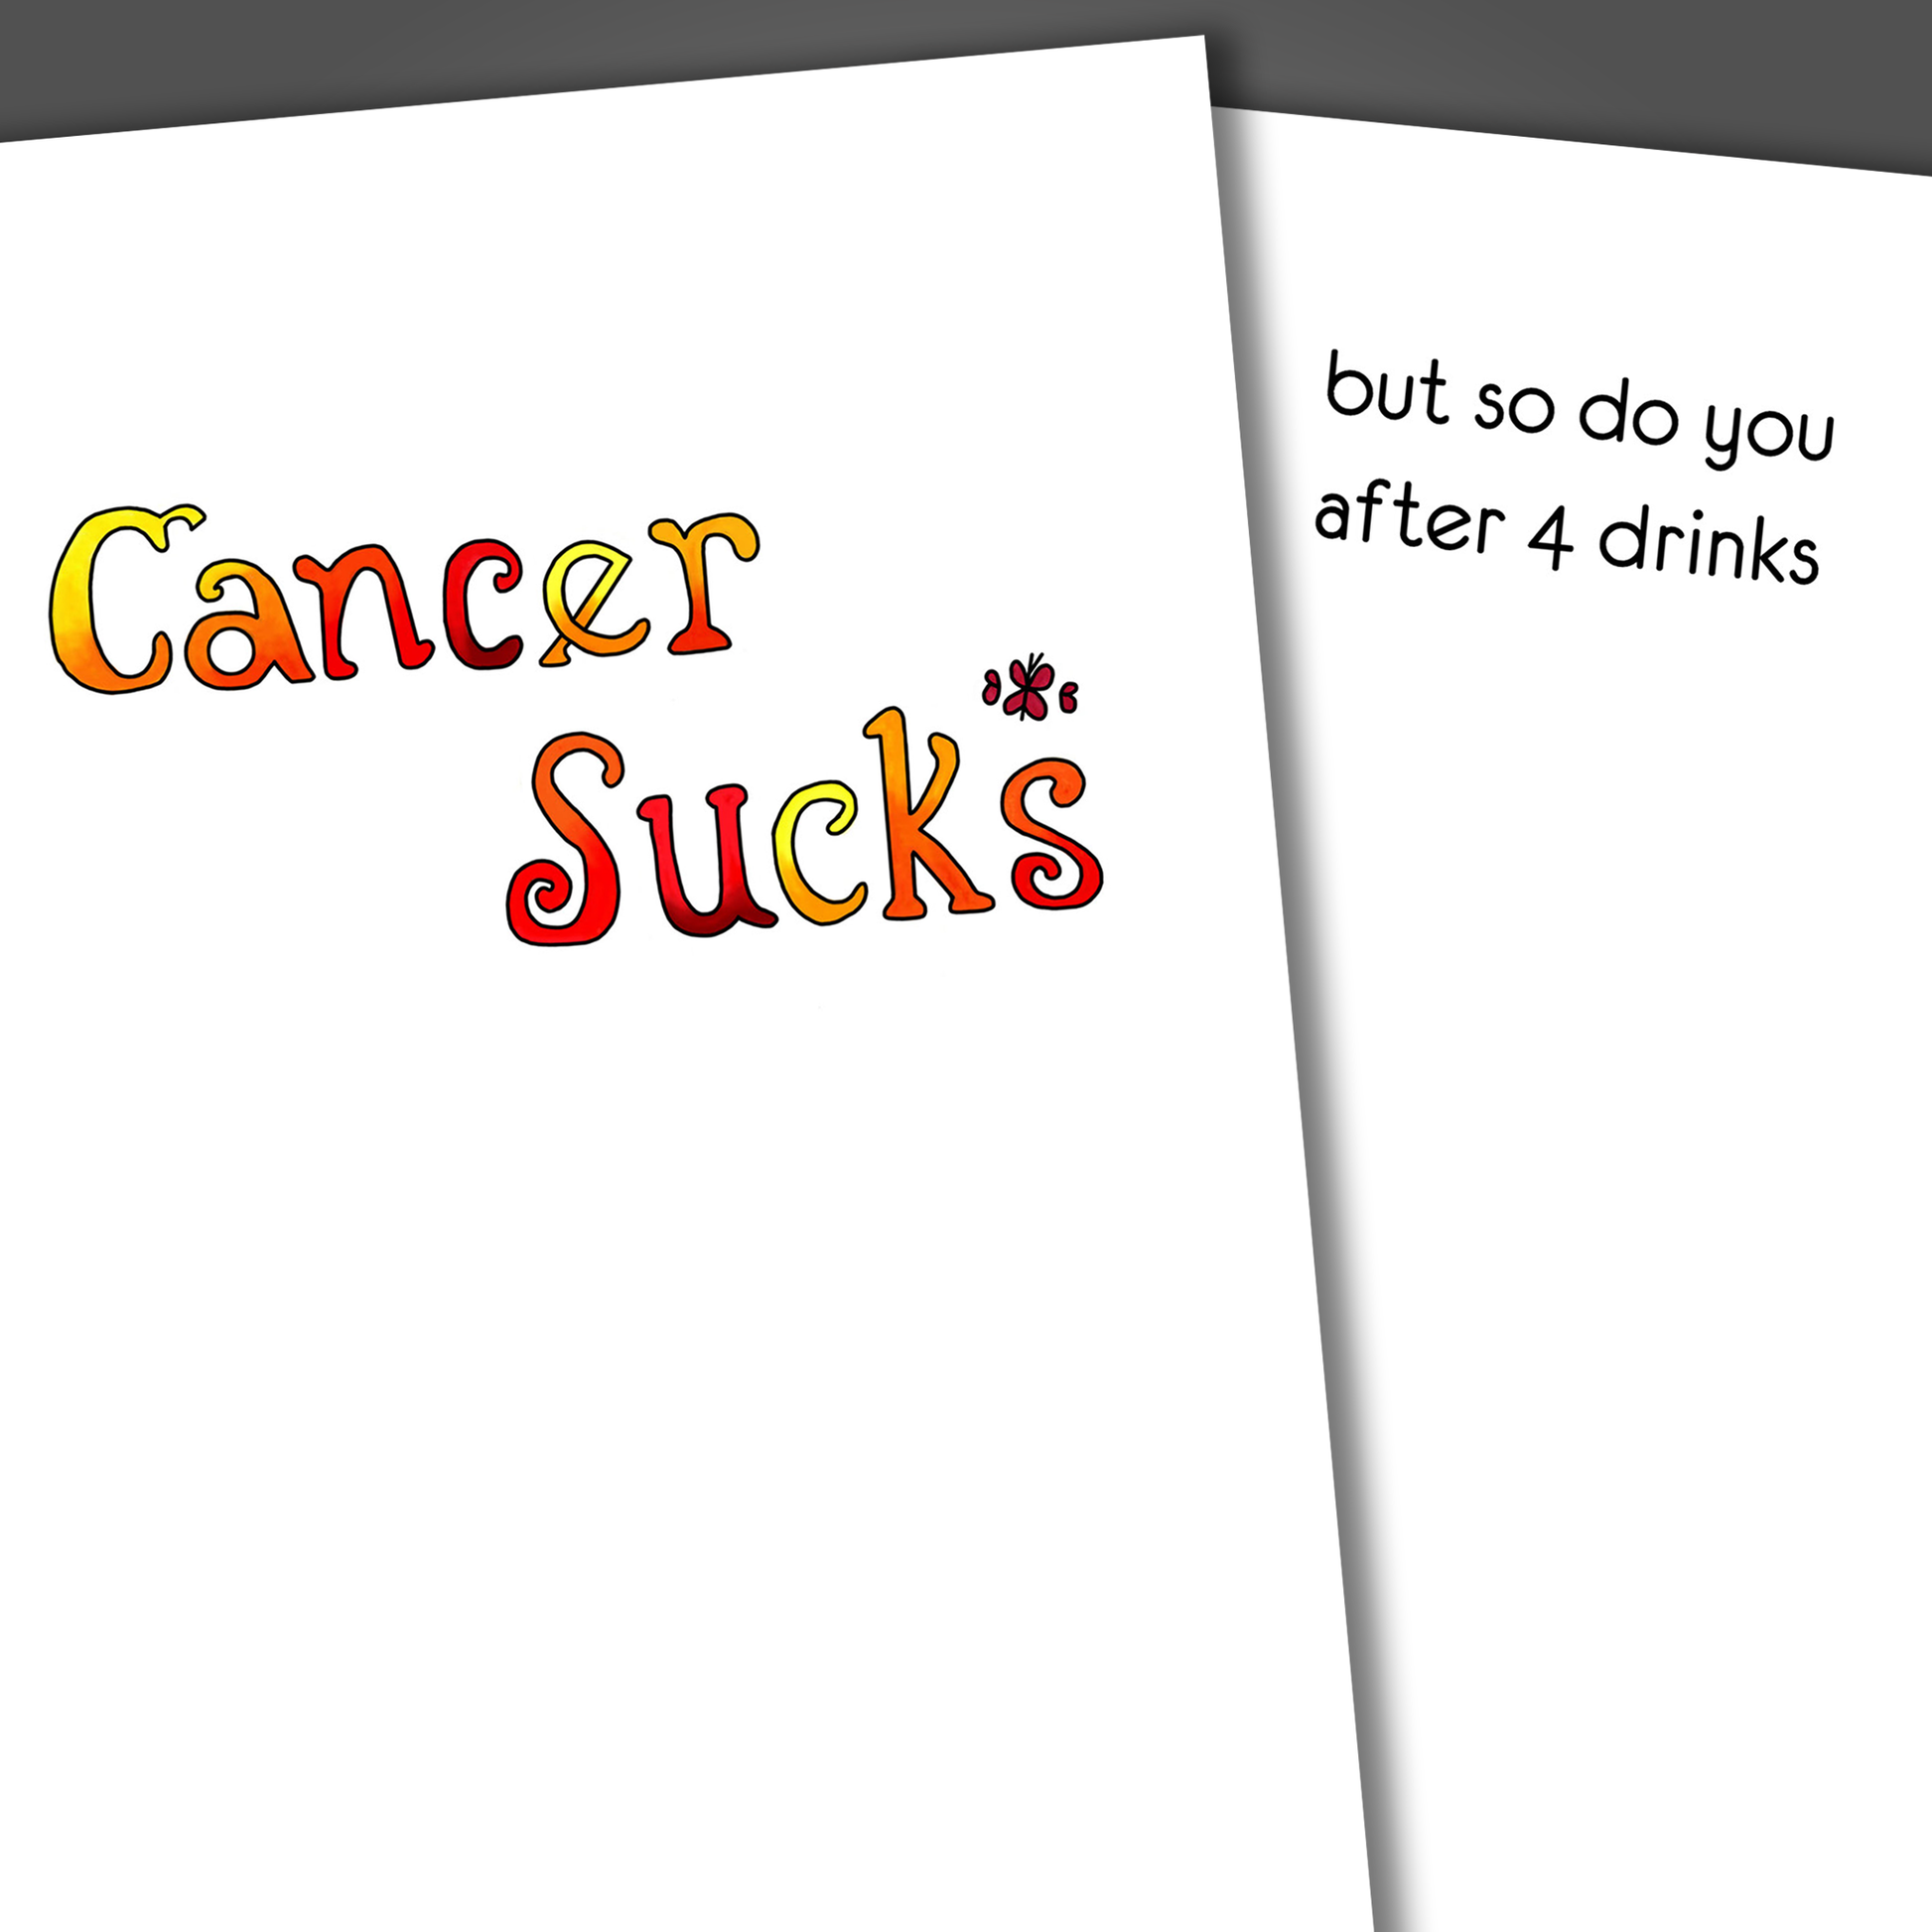 Cancer encouragement card that says cancer sucks drawn on the front of the card in orange and red. Inside the card is a funny joke that says so do you after 4 drinks.